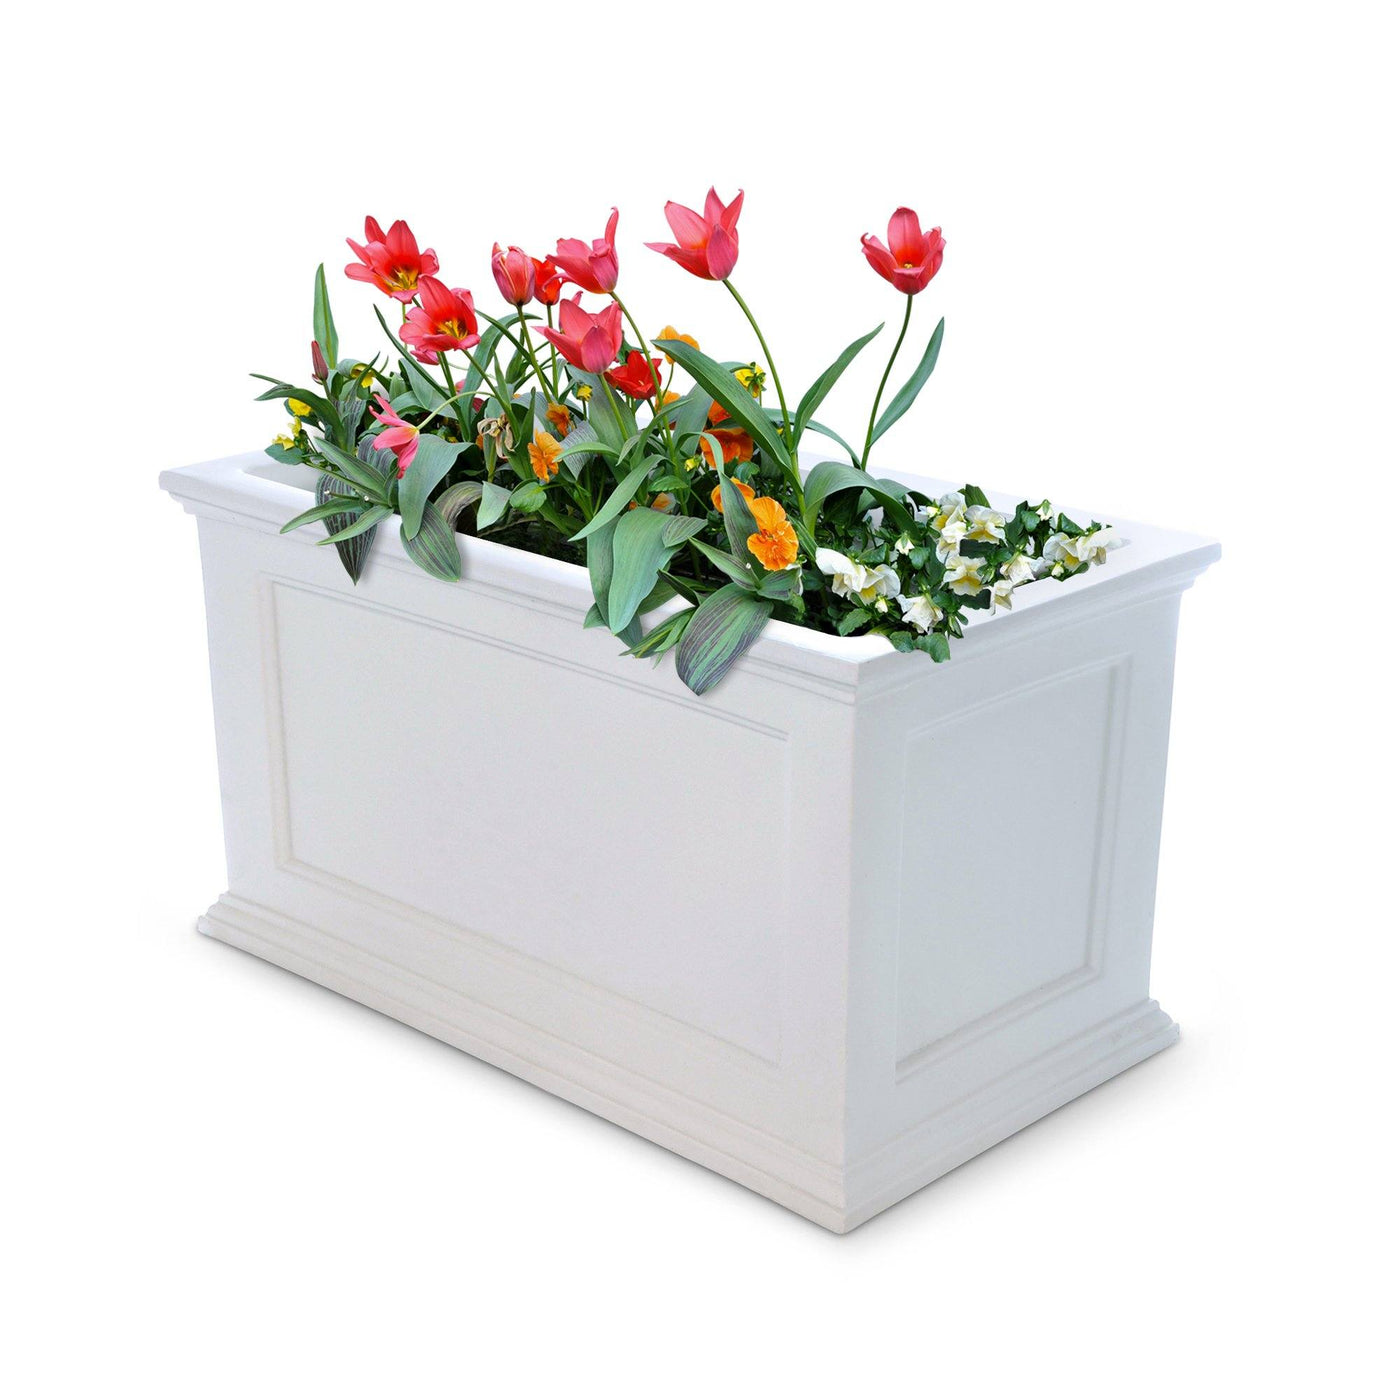 Beckett Patio Planter 20in x 36in Highwood USA 